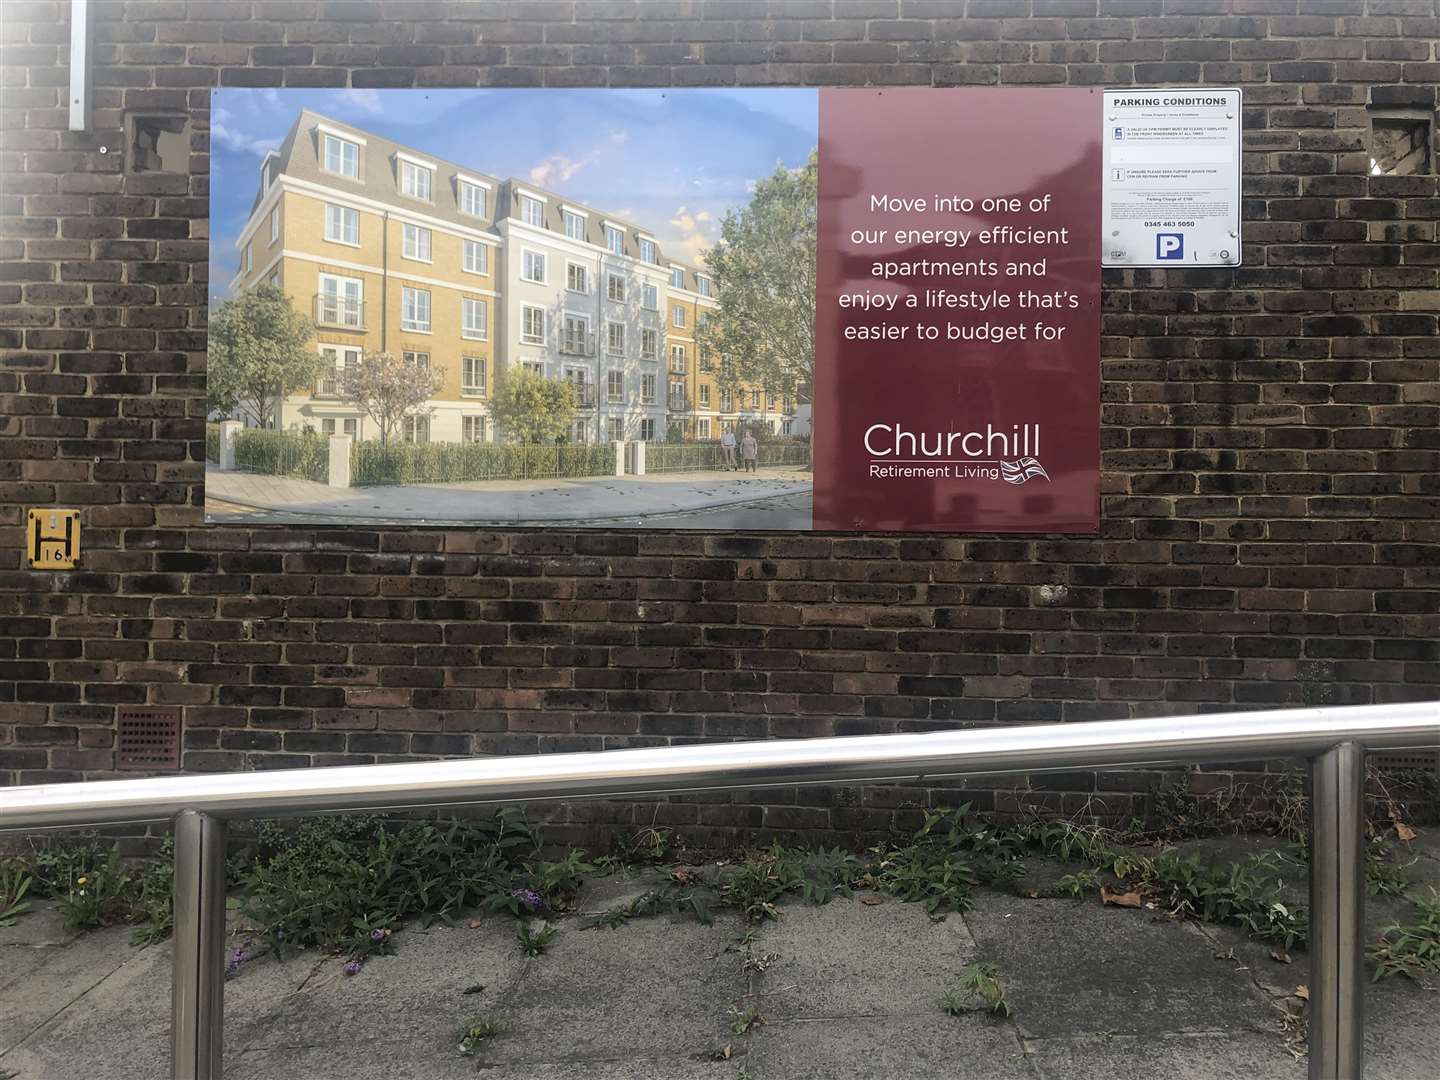 The new Churchill Retirement Living development in Windmill Street will feature 75 independent living retirement apartments